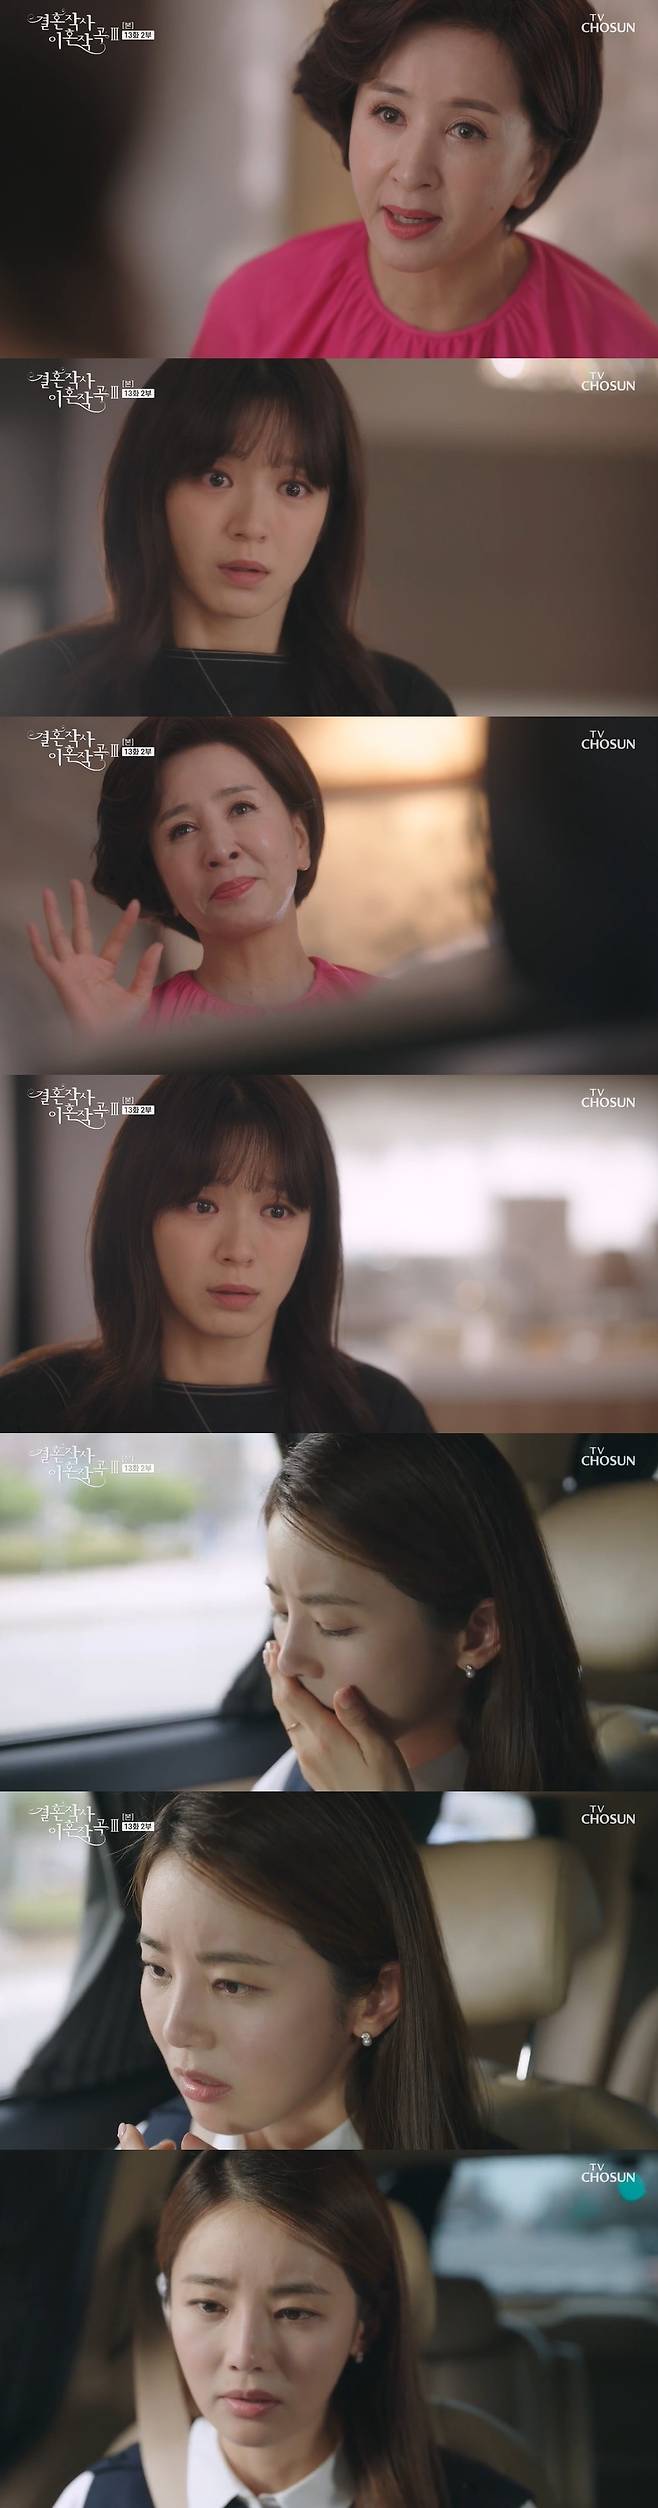 Seoul = = Marriage Writer Divorce Composition 3 Hye-sook Lee Confessions to Ami that he killed Noh Joo-hyun.Jean Soo-kyung and Moon Sung-ho got married, and Lee Ga-ryeong started having morning sickness.On the 23rd TV weekend, Drama Drived Composition 3 of Marriage Writing (playplayed by Im Sung-han/directed by Oh Sang-won Choi Young-soo) was portrayed by Kim Dong-mi (Hye-sook Lee), who is showing an increasingly bizarre appearance.On the same day, Seo Dong-ma (Boo Bae)s father visited the house of his daughter-in-law, Safi Young (Park Joo-mi), with his son.Kim Dong-mi, who visited Safi-youngs house with a dream of her granddaughter Shin Ji-ah (Park Seo-kyung) being kidnapped, said, I like the person so much, do you hear that?Kim Dong-mi, who went to the room, said, Why is the elderly person so good? The force is not a joke. Even though he laughed, Shin Ki-rim suddenly appeared, Is not it the director?I was afraid that Kim Dong-mi was beaten by her husband, Shin Ki-rim (Noh Jo-hyun), who had left the world, and she was frightened by the western half (Moon Sung-ho).Safi Young was told by Shin Yu-shin (Ji Young-san) and Ami (Song Ji-in) that Kim Dong-mis condition was not good.While Safi Young was out, Kim Dong-mi was exercising alone and singing the periodical text, and he was also seen to be in and out of his mind, saying, I am already like my mother and I want to value the person.Safi Young and Shin Yusin Ami suggested Kim Dong-mi to have a health checkup. Kim Dong-mi refused, saying, I have to take care of Jia today. However, Safi Young decided to get a health checkup because he did not go to work.Ami tried to meet her, saying, My mothers health is our happiness, but Kim Dong-mi said, Its like an exhilaration.Kim Dong-mi also said to Safi Young, I caught up, where do you meet the bachelor groom? He said, I saved the country in my past life.Kim Dong-mi became sharper to Ami. When Ami gave him a nutritional supplement, he said, You eat, why do you eat? What do you know?When I asked, I came out with a red bean paste and said, Do not you want me to eat and die? He said, I killed the director like that. He also told Shin Ki-rim that he had been fed carbohydrates to soar blood sugar and blood pressure, and Kim Dong-mis creepy smile made Ami look terrified.Kim Dong-mi also said, I grabbed my heart once without pain and said goodbye, Sayonara, Bye-bye. Ami was scared and shivered, saying, Have you died like that?It was the wedding day of the West Ban (Moon Sung-ho) and Ishieun (Jeon Soo-kyong), and the two had a happy wedding ceremony in celebration of the guests.The two of them then went on a honeymoon and spent a sweet time alone. Ishieun showed his affection by digging the ear of the West.In the meantime, the questionable appearance of Choi, the deacon (Park Jung-eon), who was in the western house, attracted attention.Earlier, when Ishi moved to the house of the West Bank, he said, Cold and hungry things come in a bunch. And he said, Do you want to see an old bride?I also laughed at it, and it gave me an ominous aura.On the other hand, Panmunho (Kim Eung-soo) called the monk to his house, judging that Songwon (Lee Min-young) was possessed by Bu Hye-ryong (Lee Ga-ryeong).The monk said, It is the right of the ice, he said, I have to go out of my way, I have a tough and strong soul, but it is not a bad soul.The young man has to go to my way, the road has changed, but I can stay in Lee Seung, he said. It is a problem if you go against the truth.I am trying to control people, he warned, sometimes I am trying to hurt people.After that, Buhye-ryong tried to eat a hamburger while riding in a car, and he had morning sickness and was surprised.